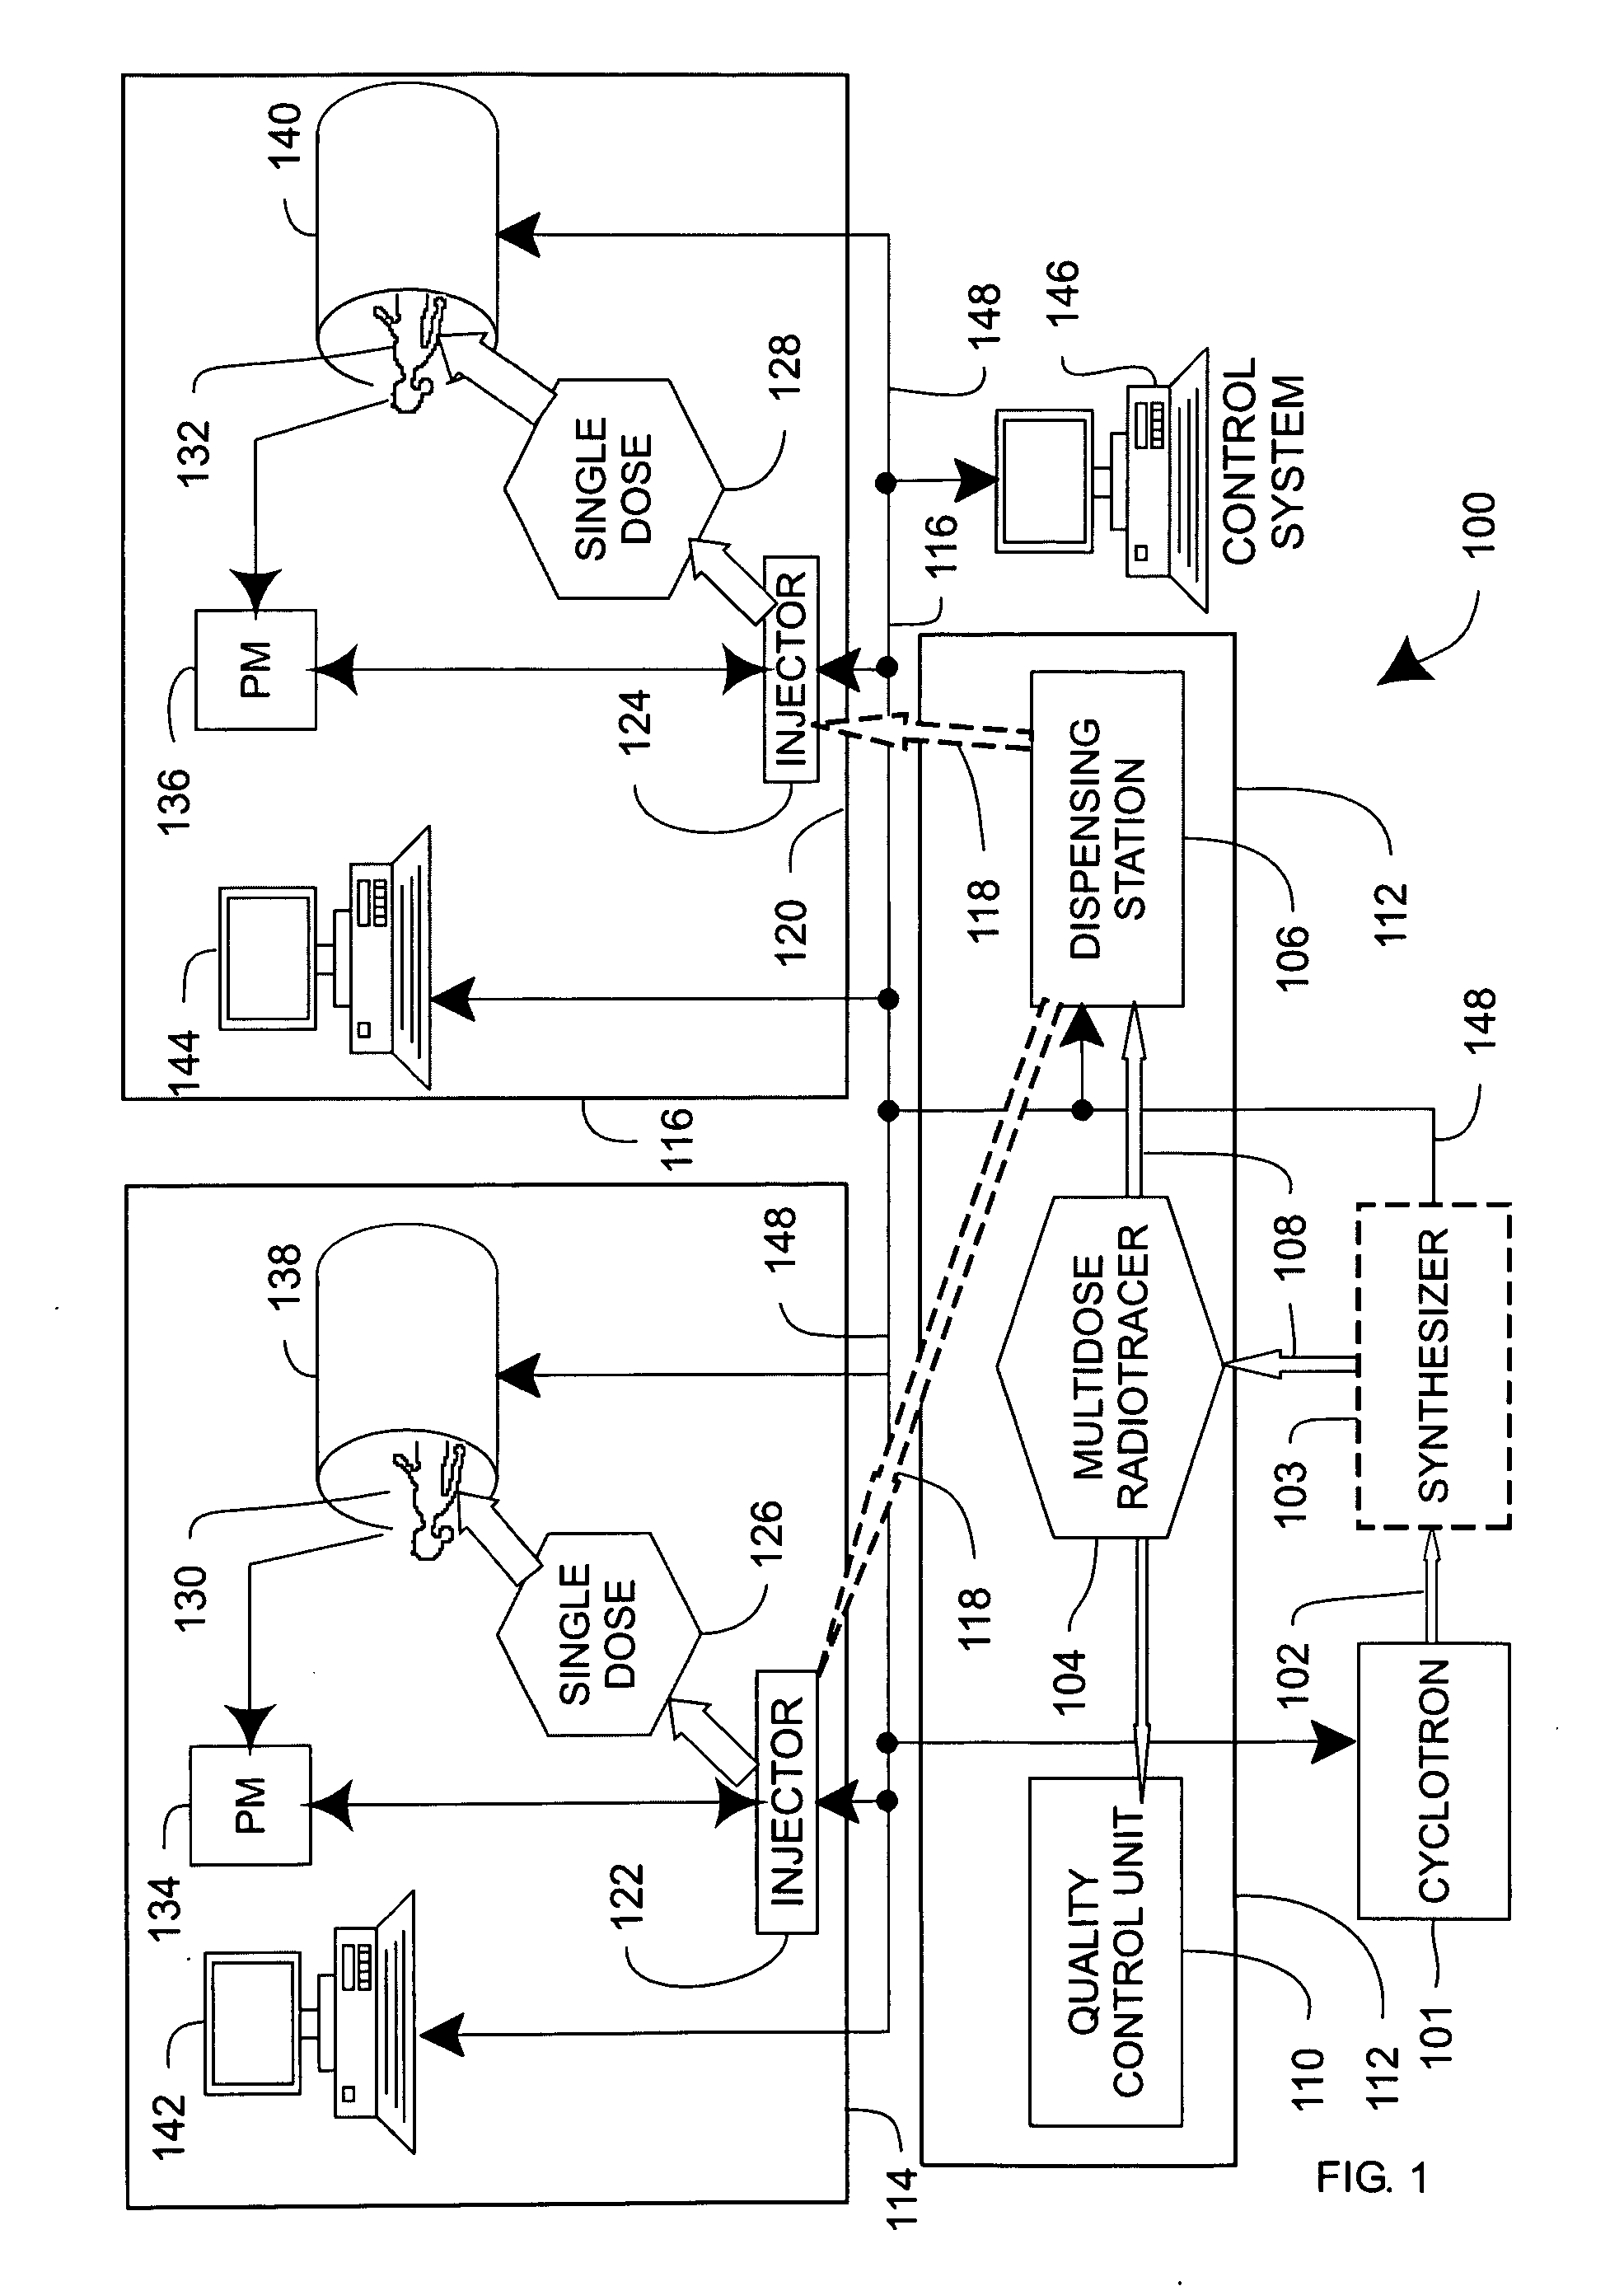 Systems, methods and apparatus for infusion of radiopharmaceuticals